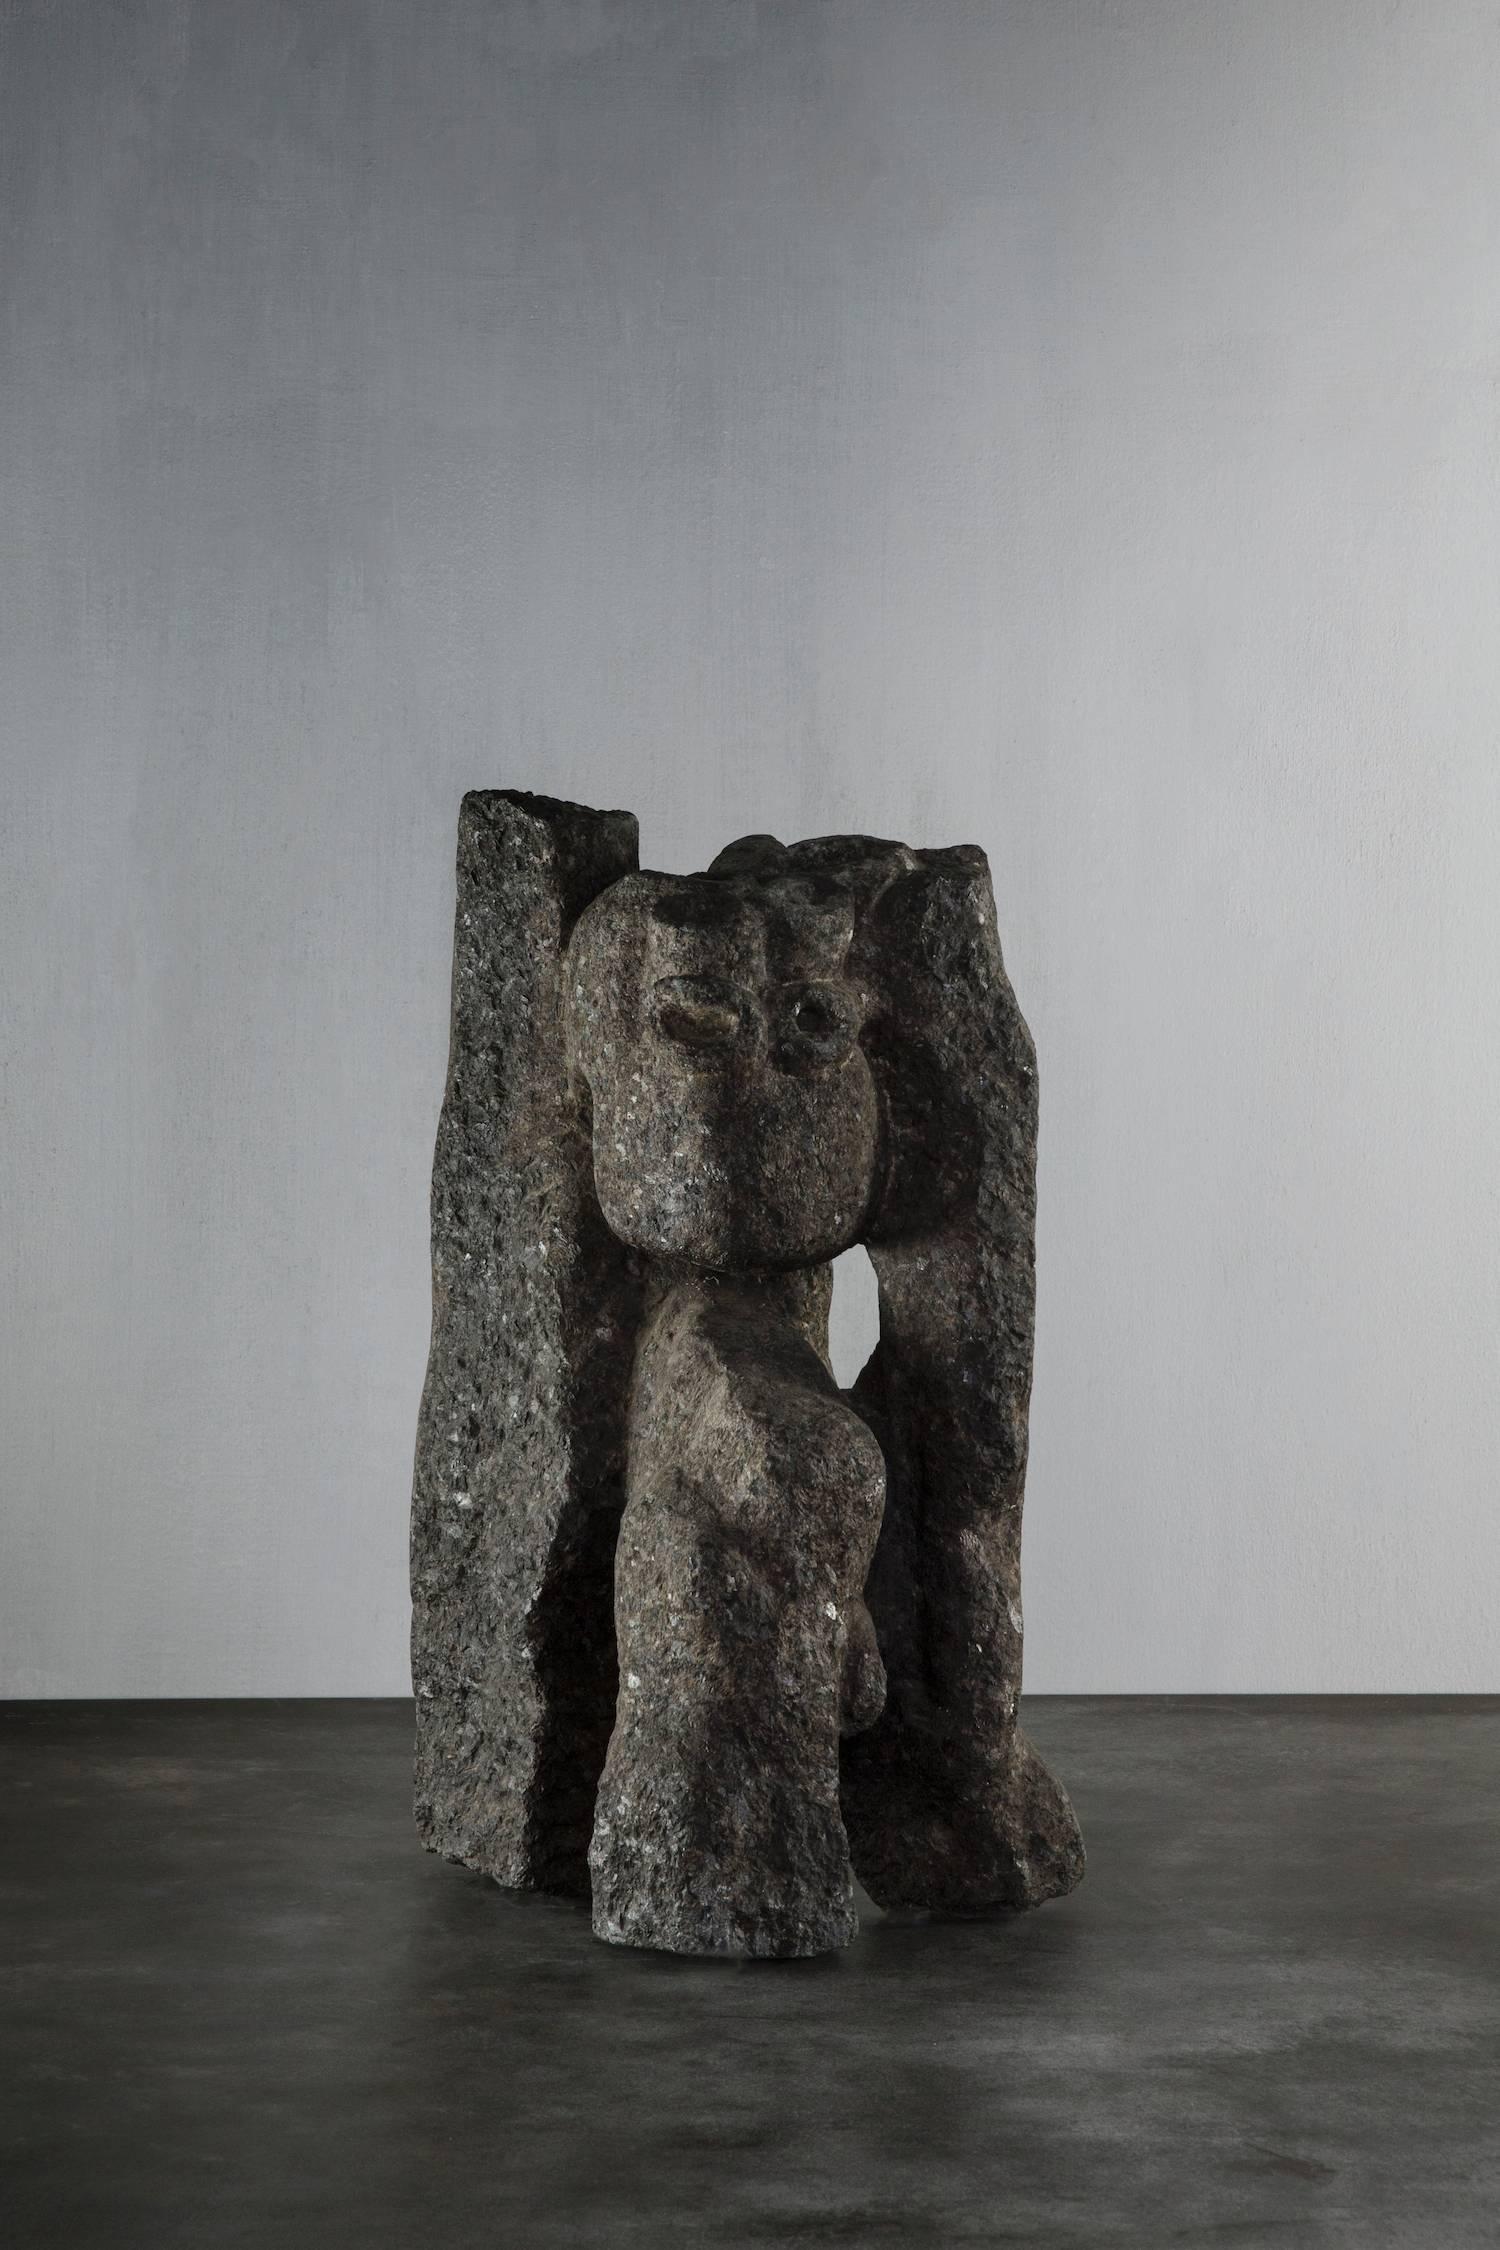 Abstract sculpture in dark granite by Danish artist Poul Vandborg.
Please note - this item is located in our New York City Studio and will be shipped from there.